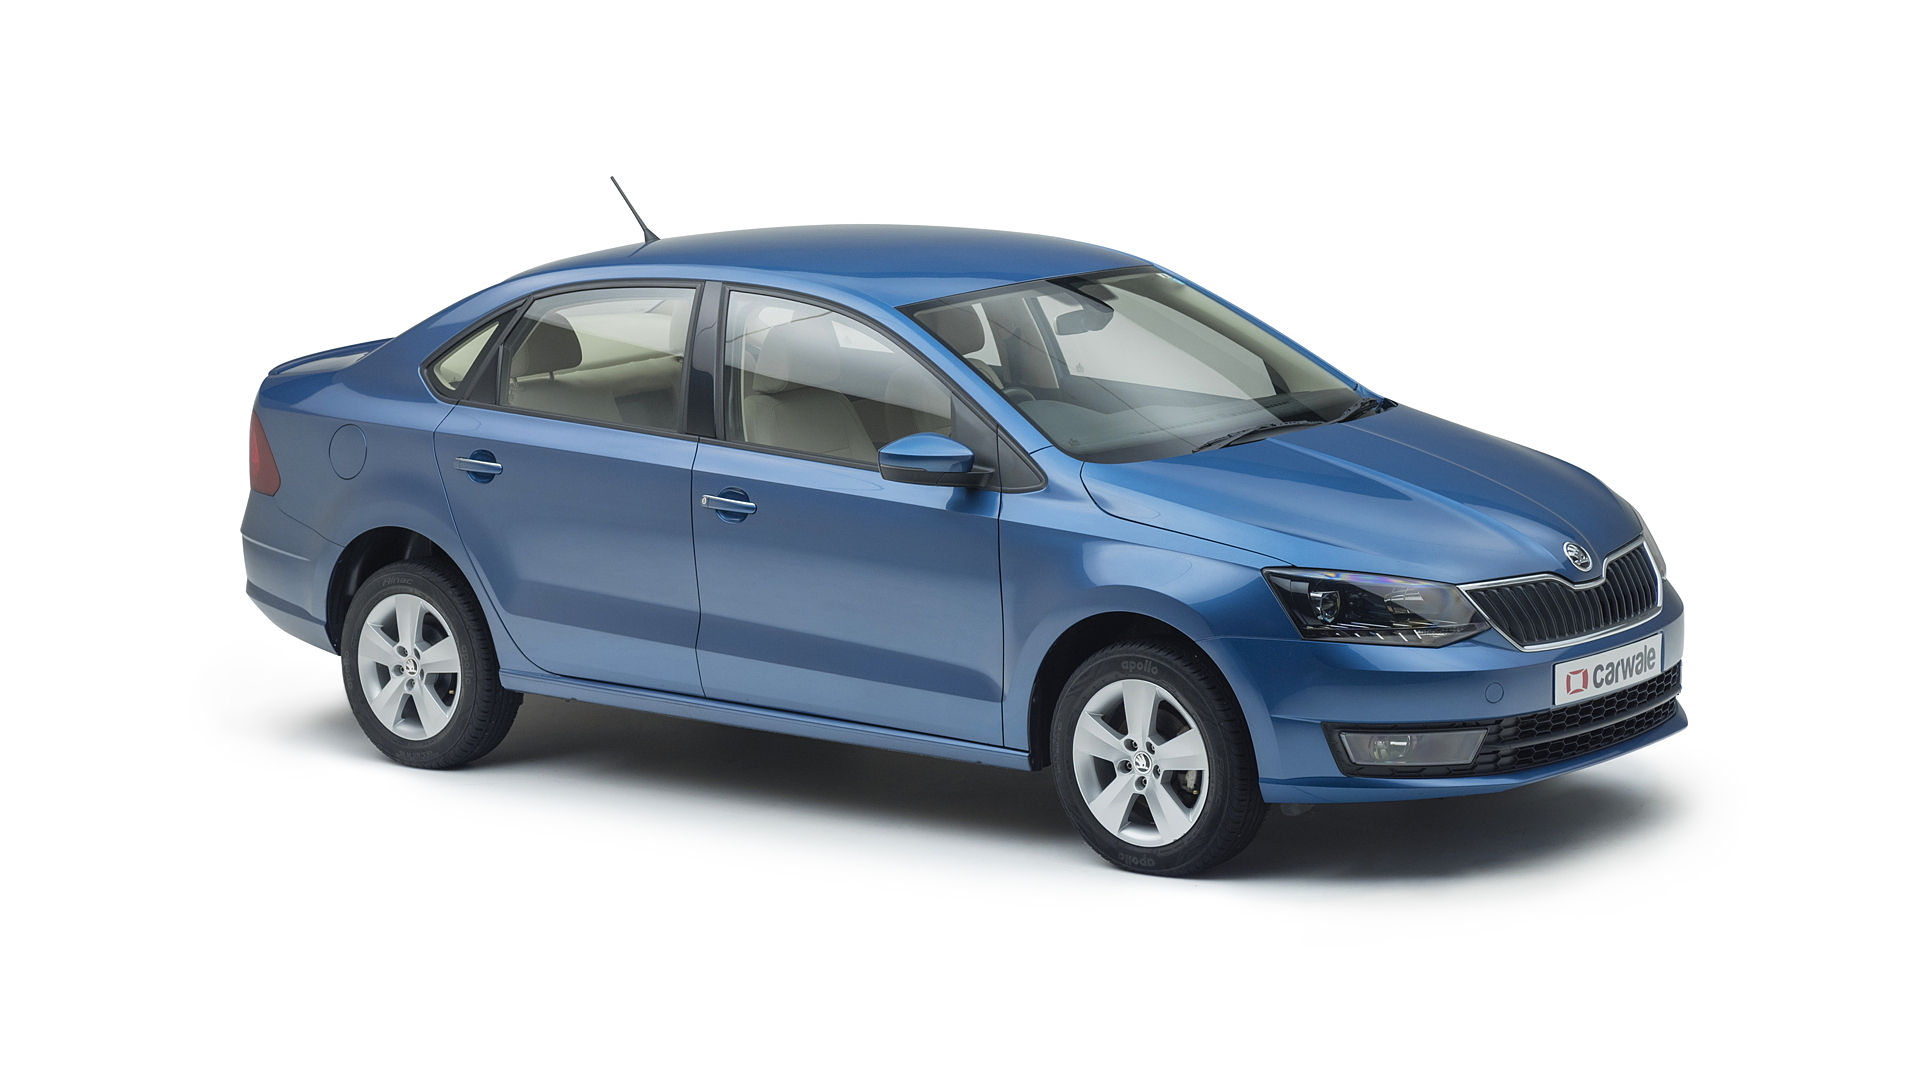 Skoda Rapid Images - Interior & Exterior Photo Gallery [50+ Images] -  CarWale